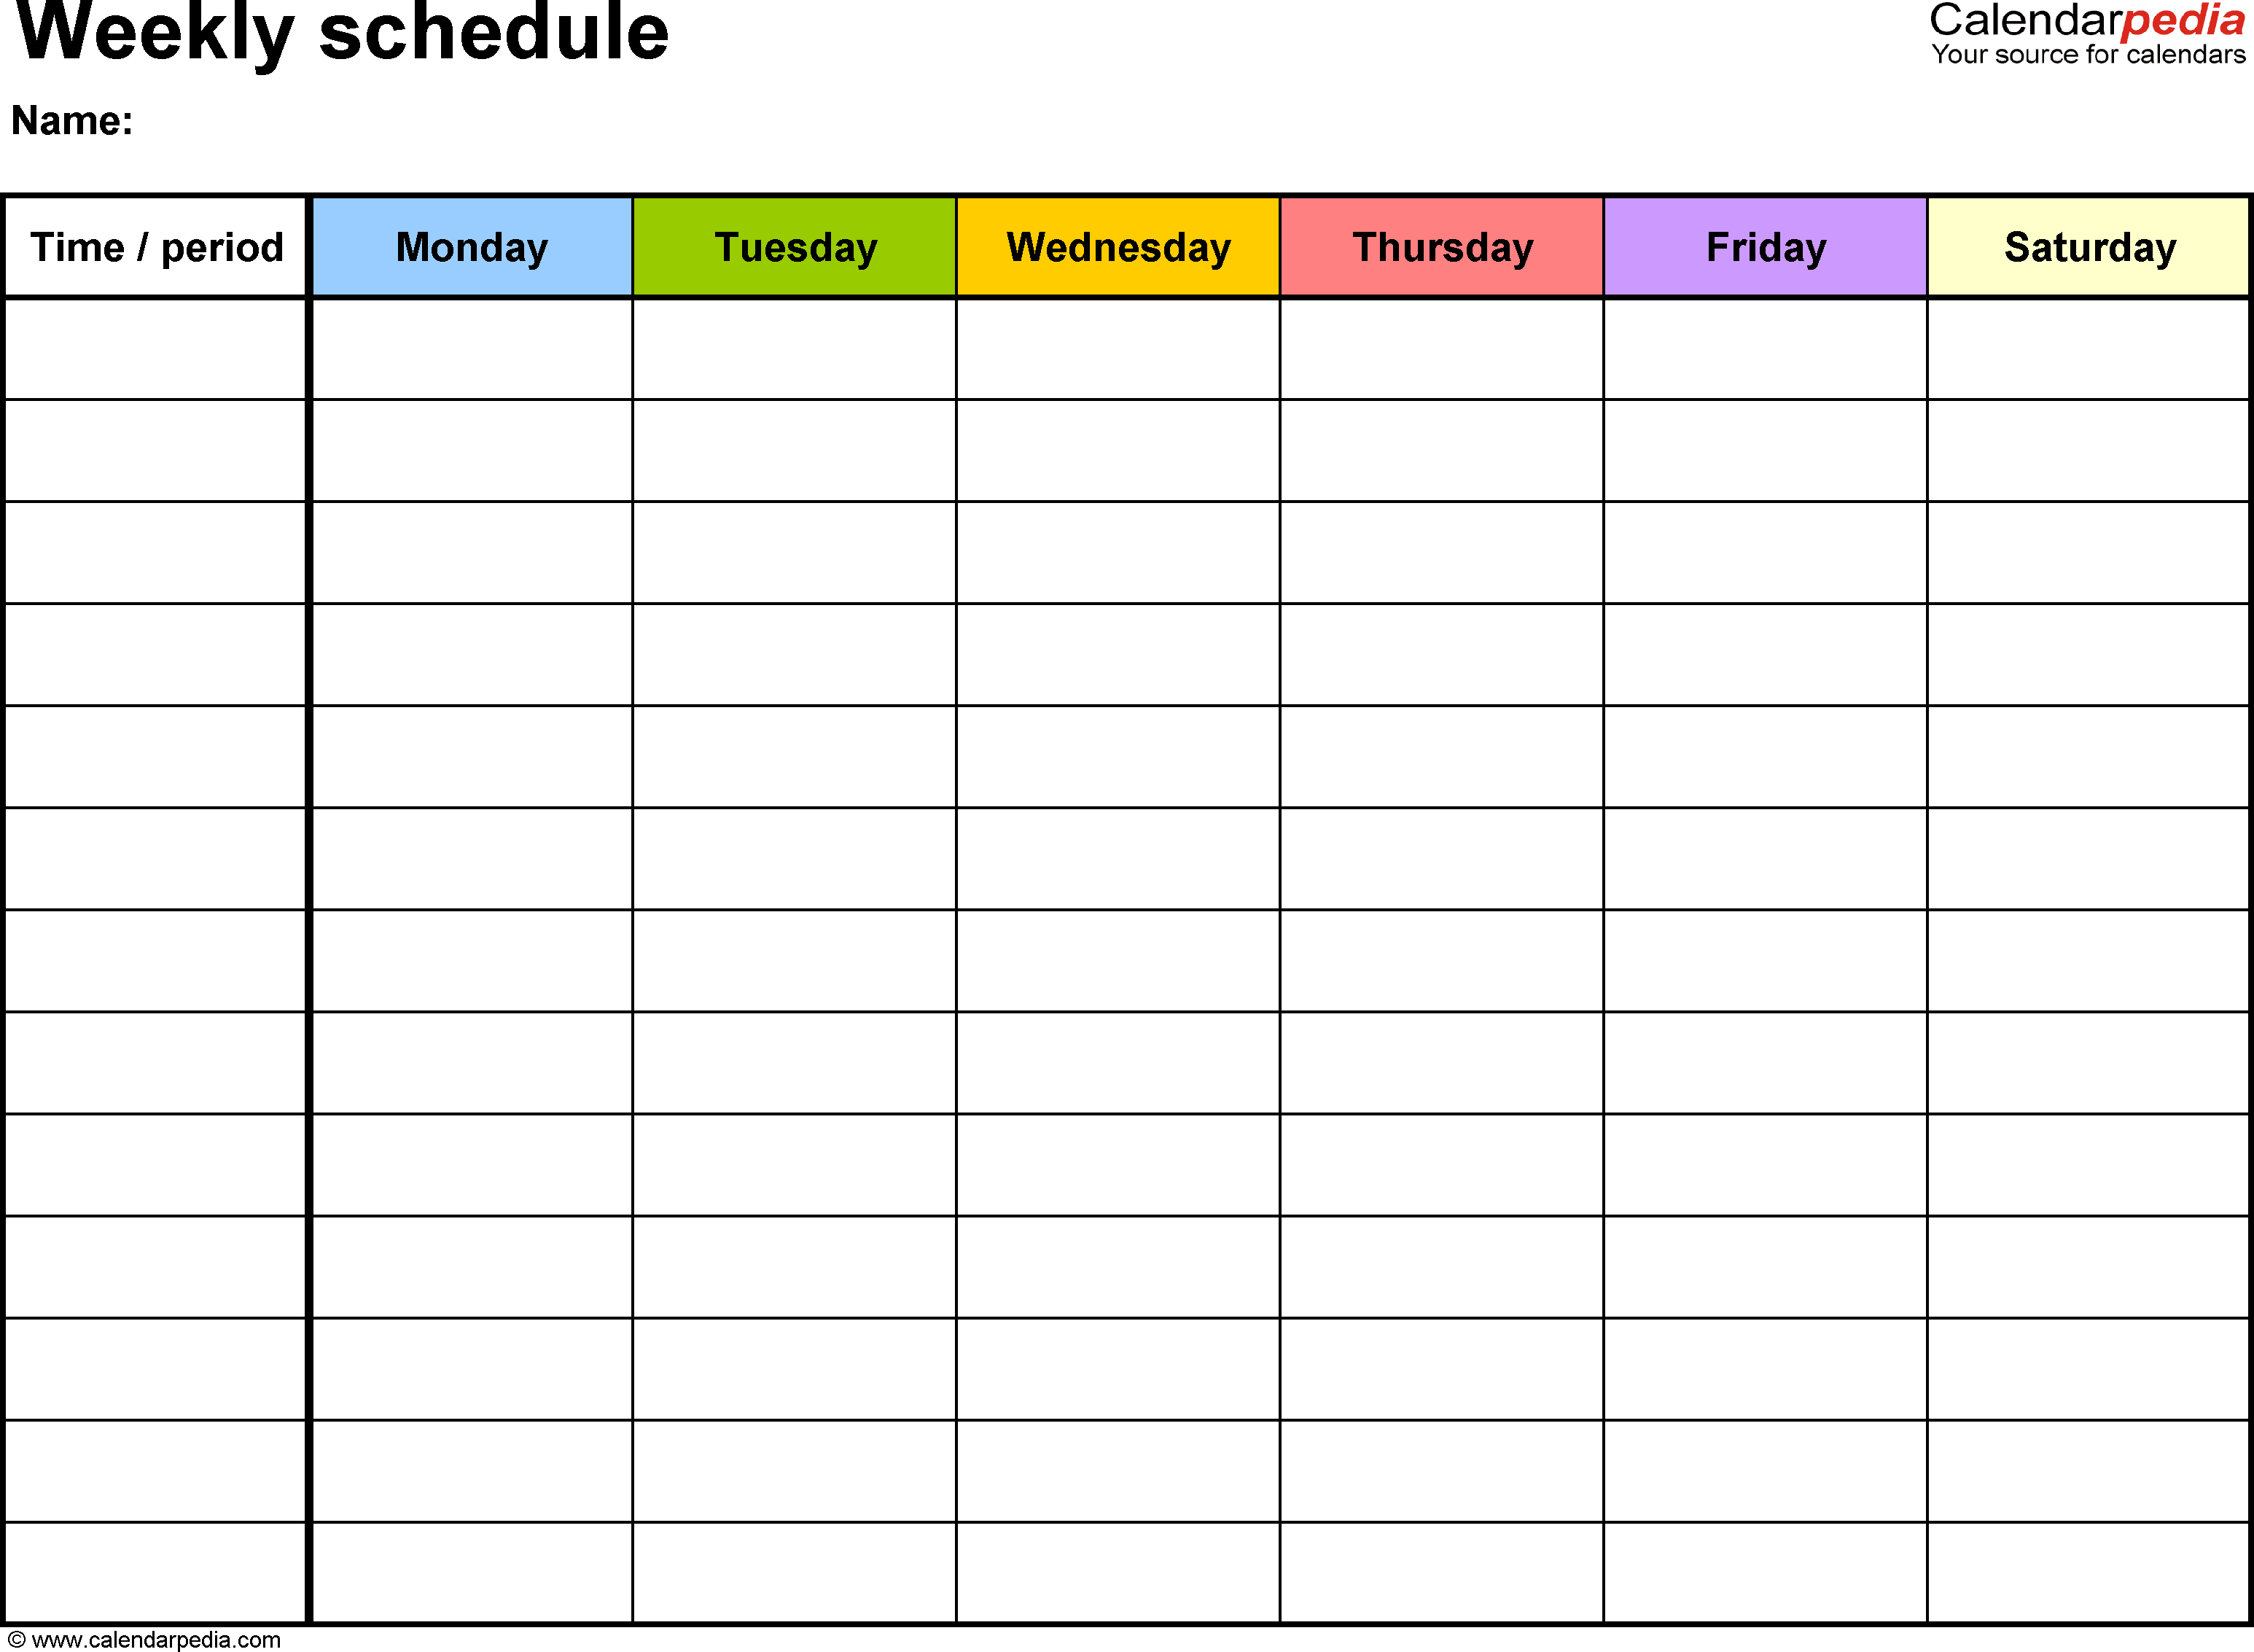 Weekly+Schedule+Template | Weekly Calendar Template intended for Blank Calendar With Time Slots